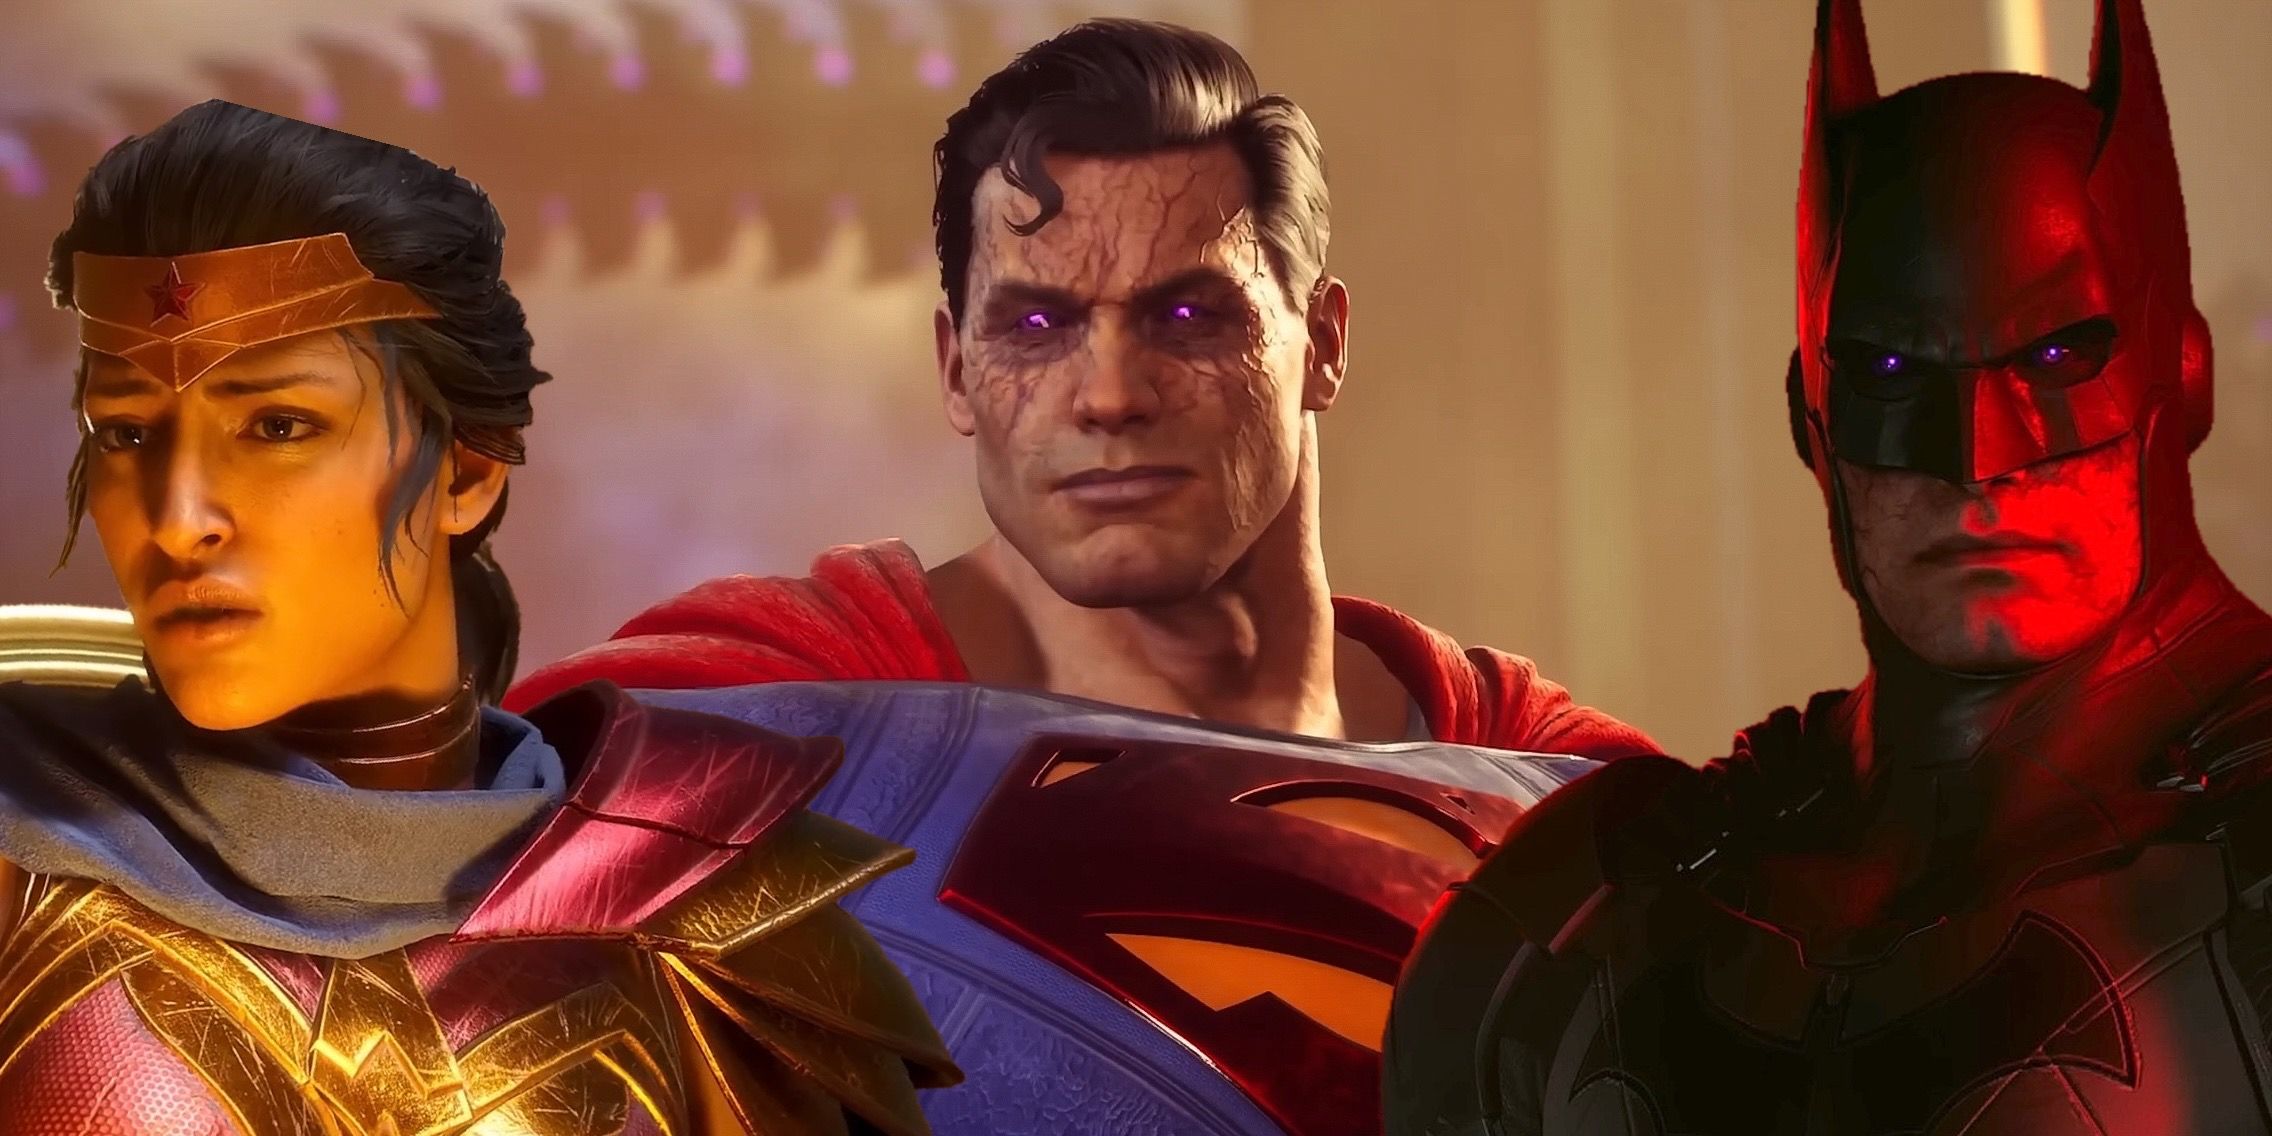 Suicide Squad: Kill the Justice League Gameplay Trailer Ufficiale - “Flash”  